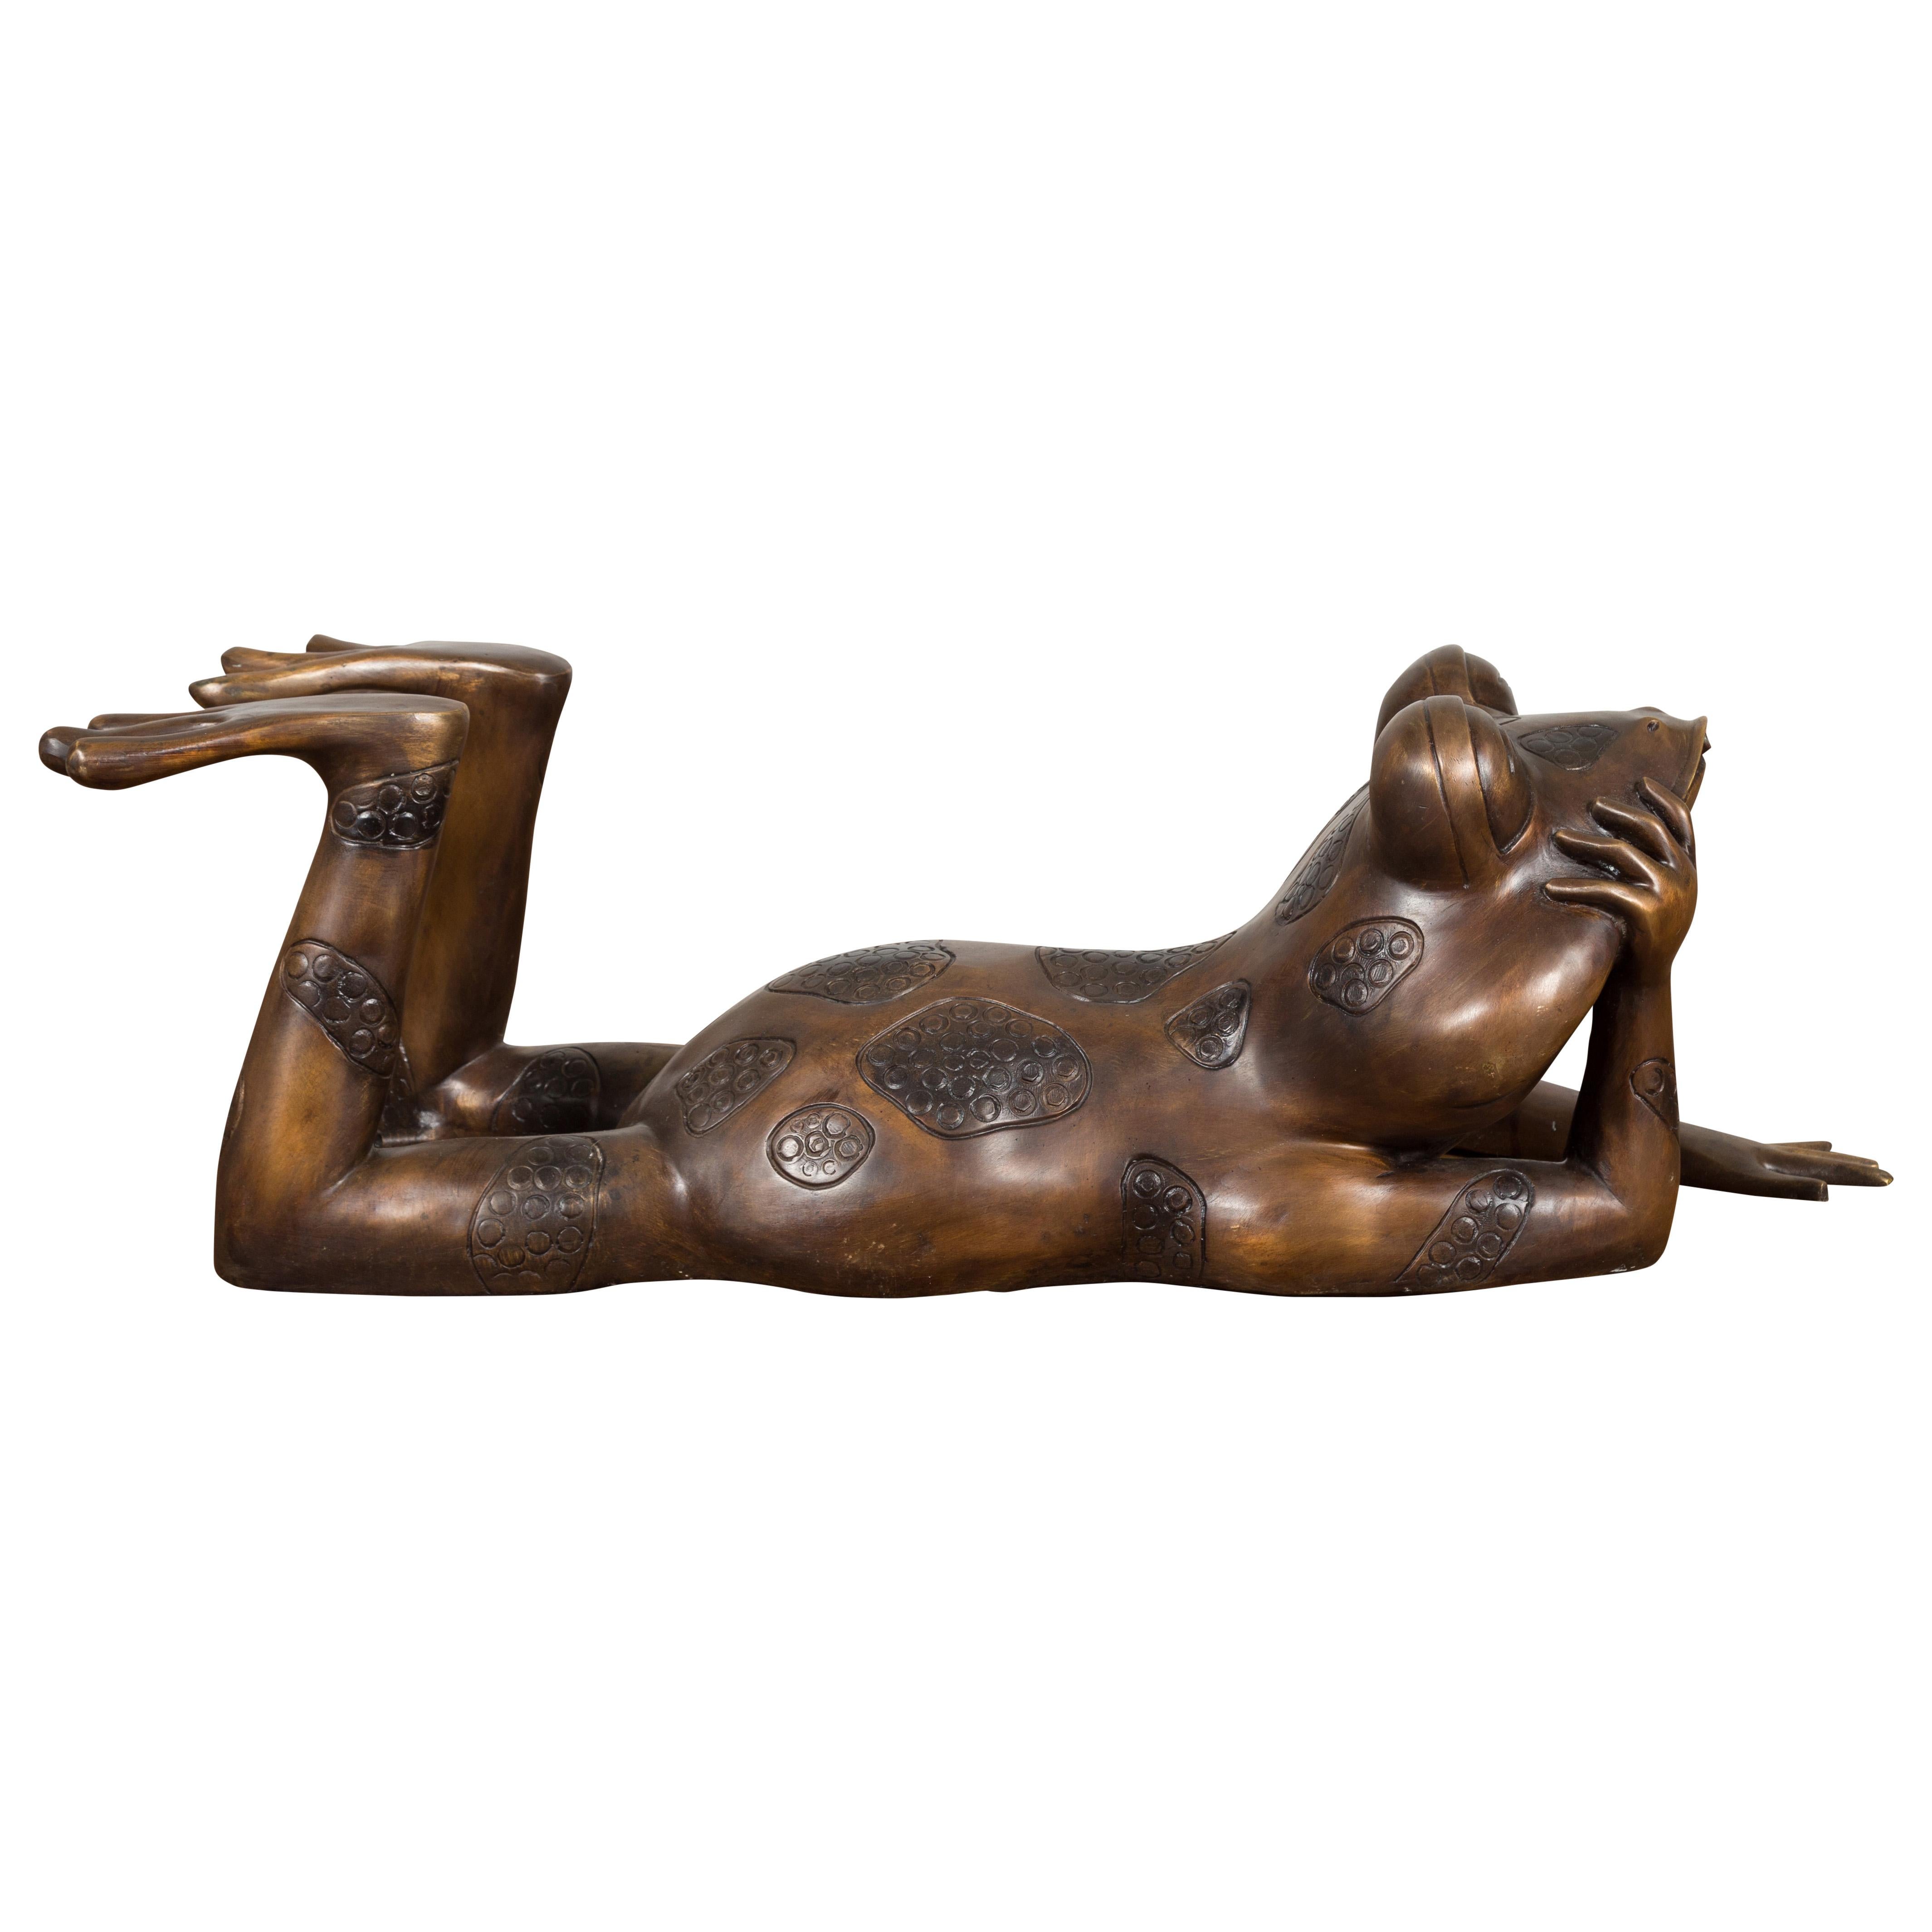 Daydreaming Frog Bronze Sculpture with Golden Patina, Tubed as a Fountain For Sale 12